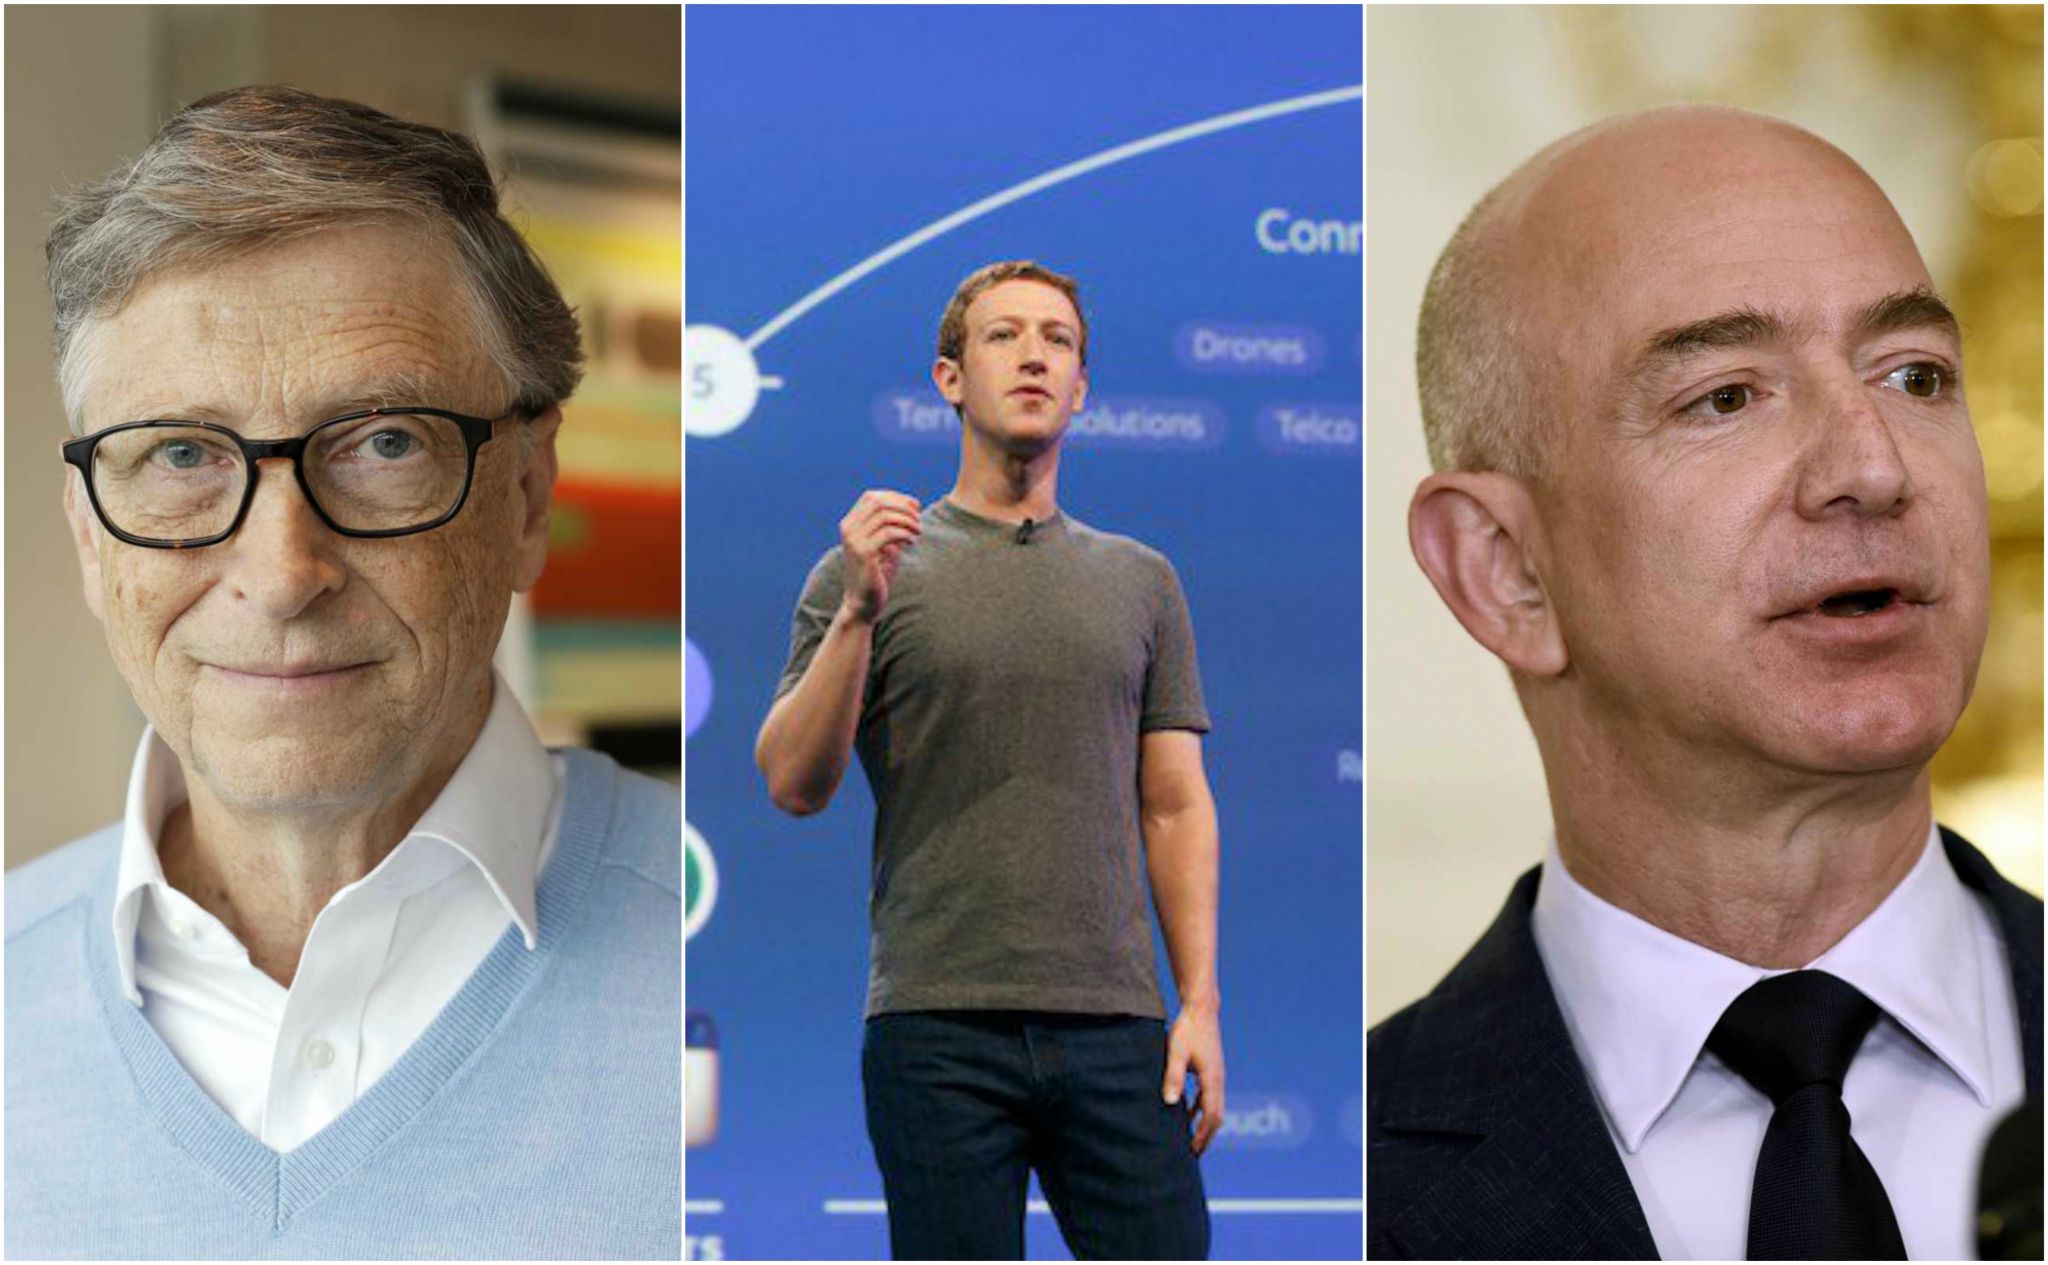 These Are The 25 Richest People In The World According To Forbes